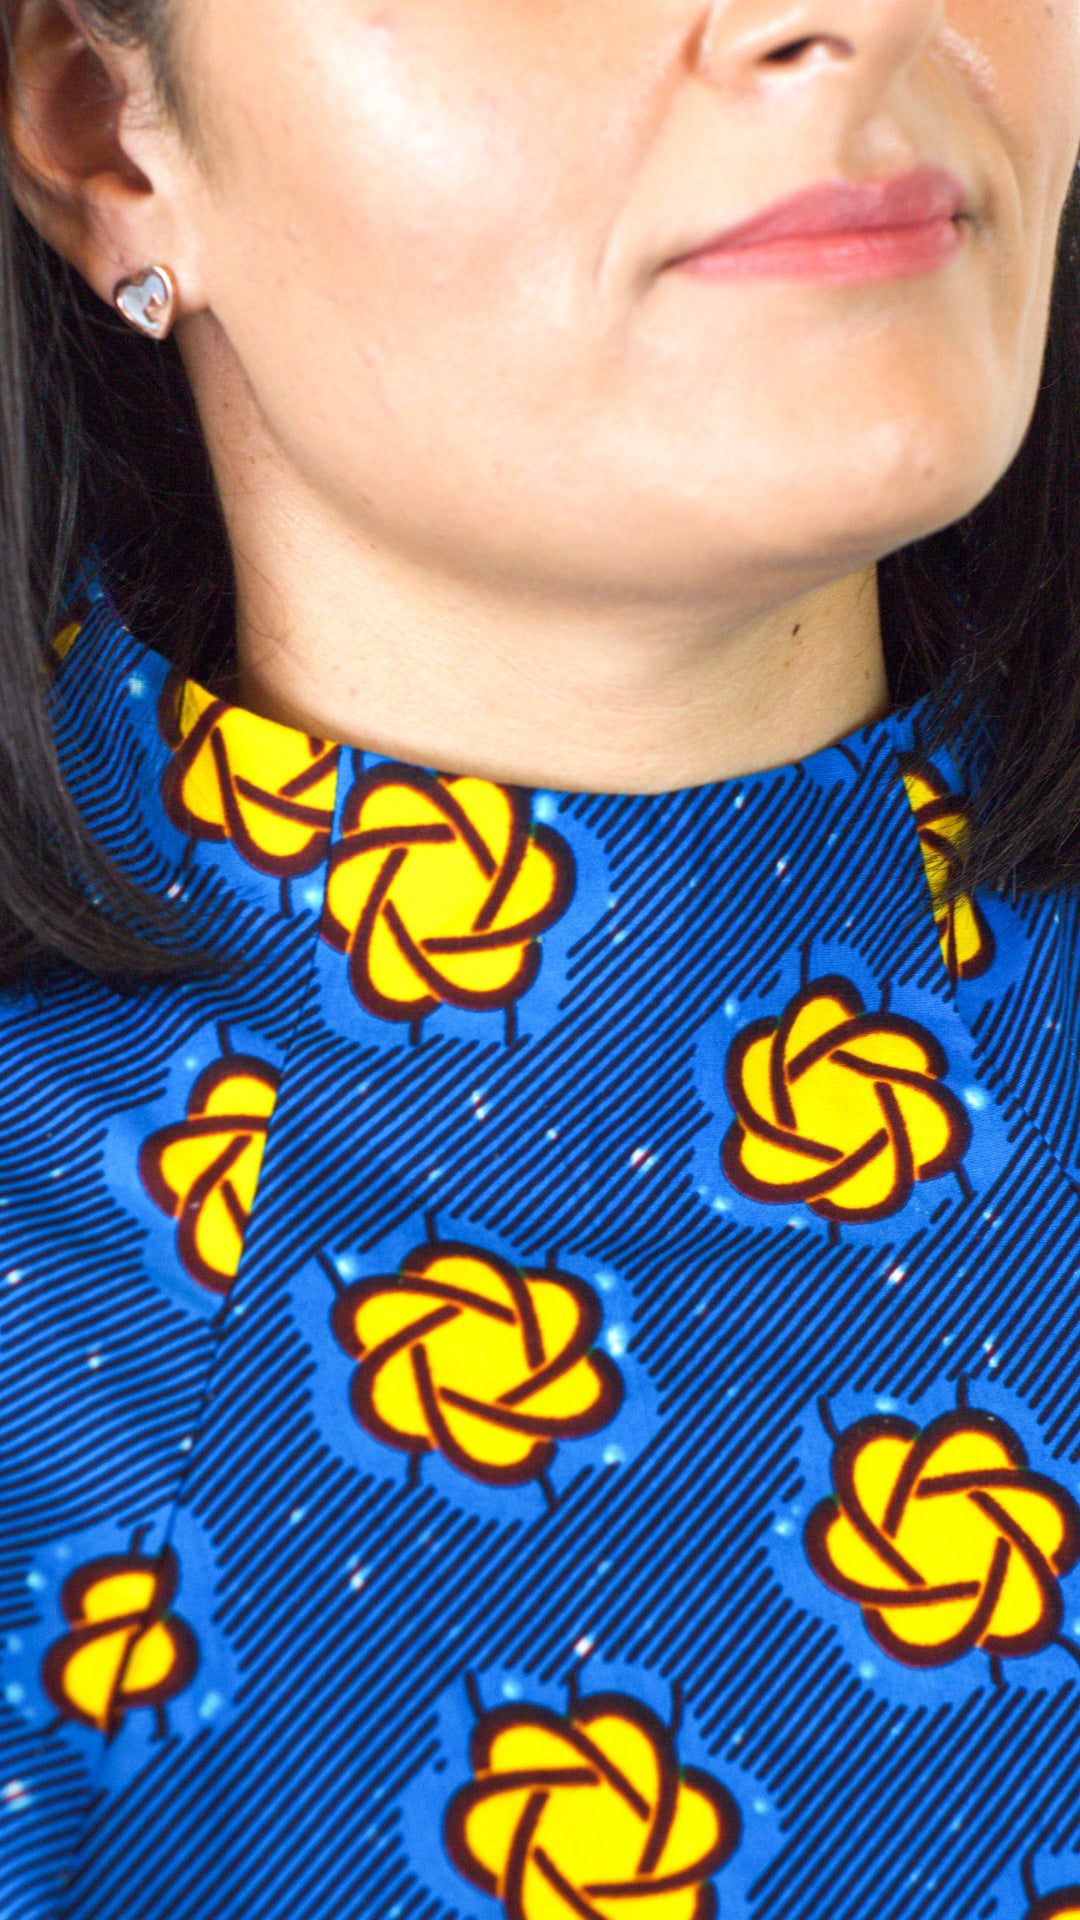 A close-up view captures the details of the neckline of the blue dress, adorned with yellow elements.